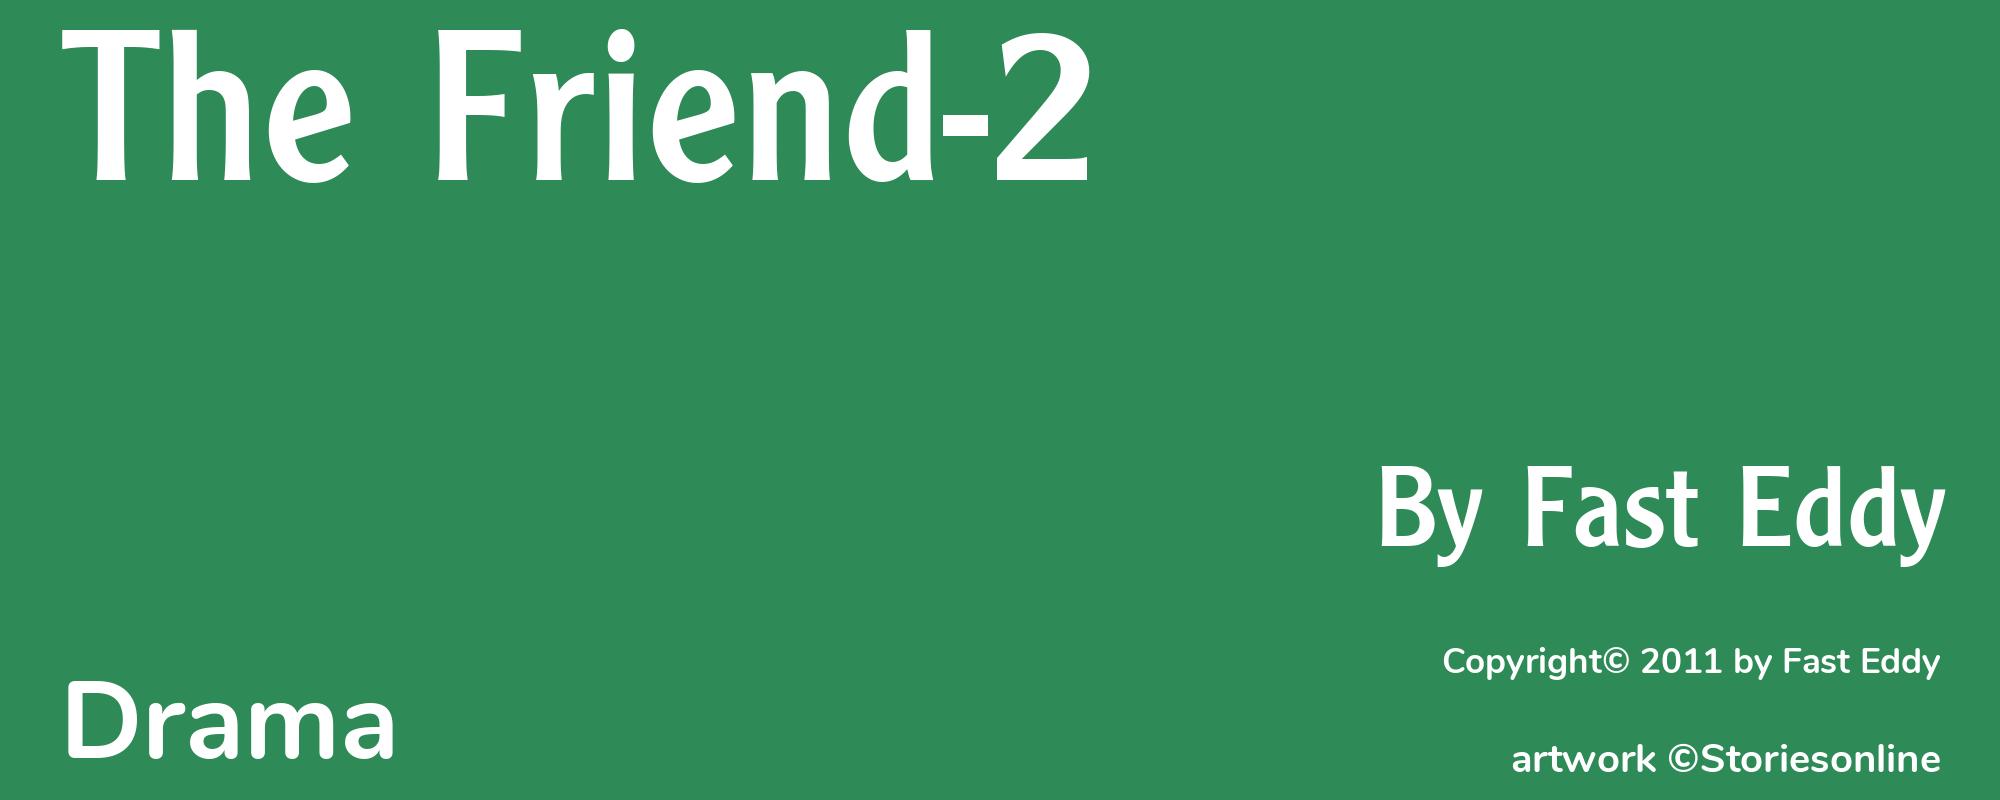 The Friend-2 - Cover